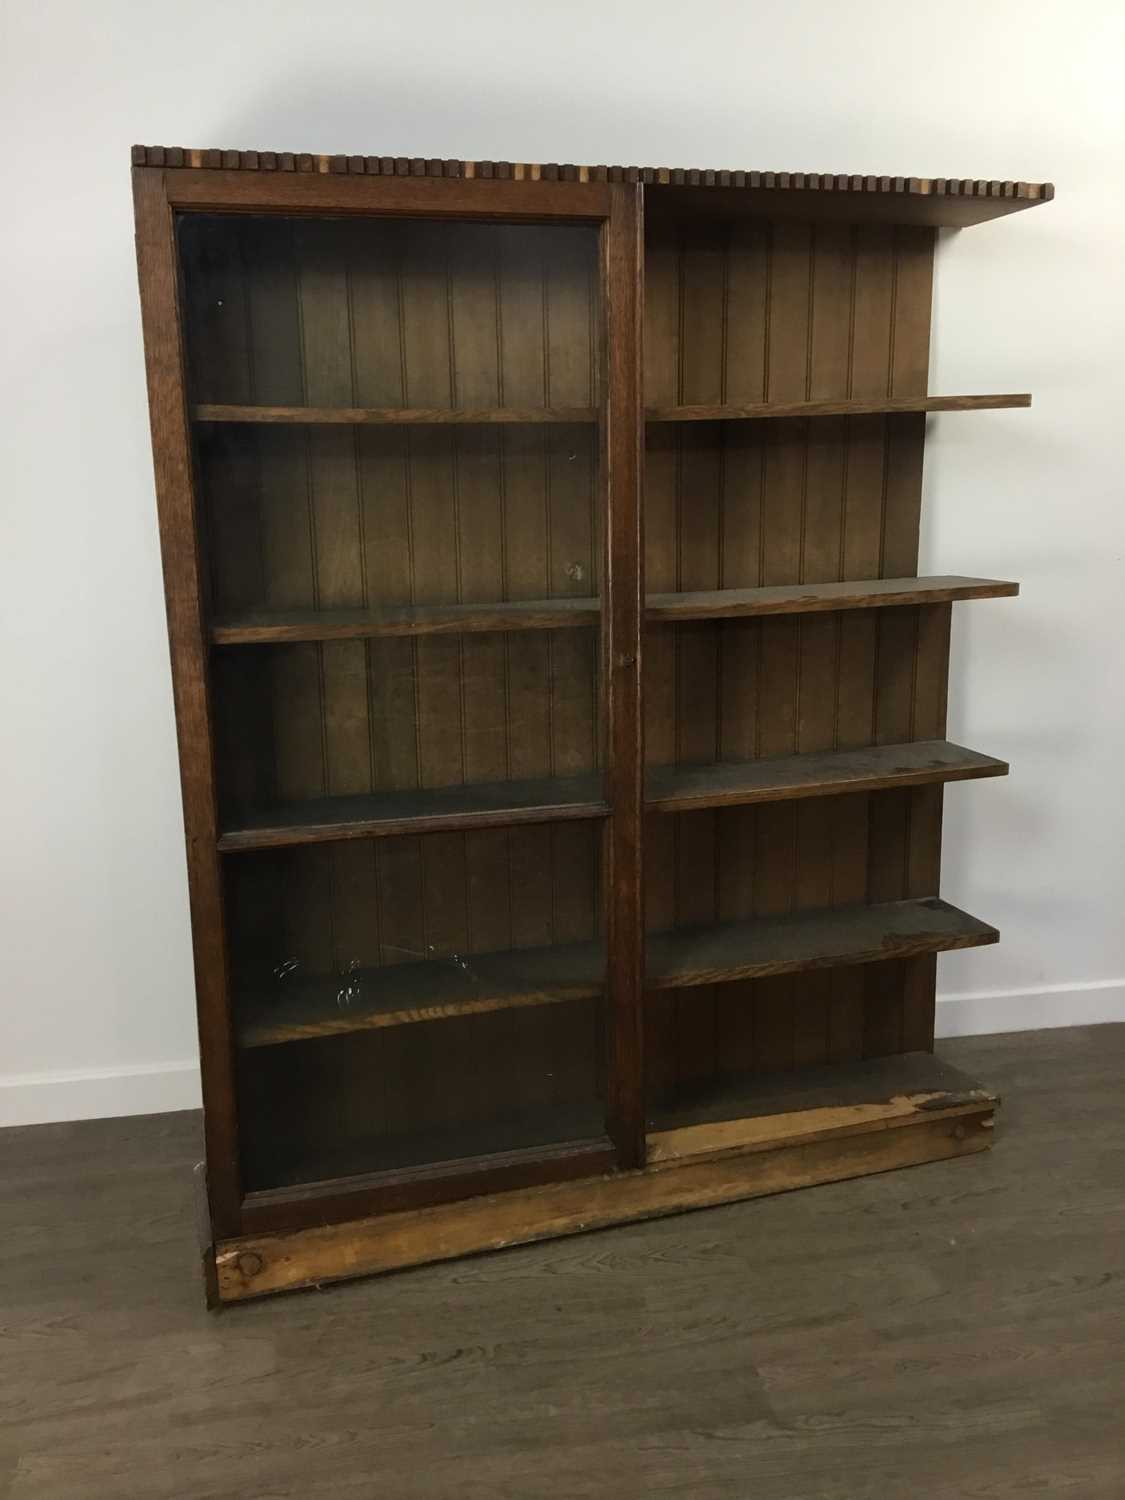 VICTORIAN OAK LIBRARY BOOKCASE - Image 3 of 6